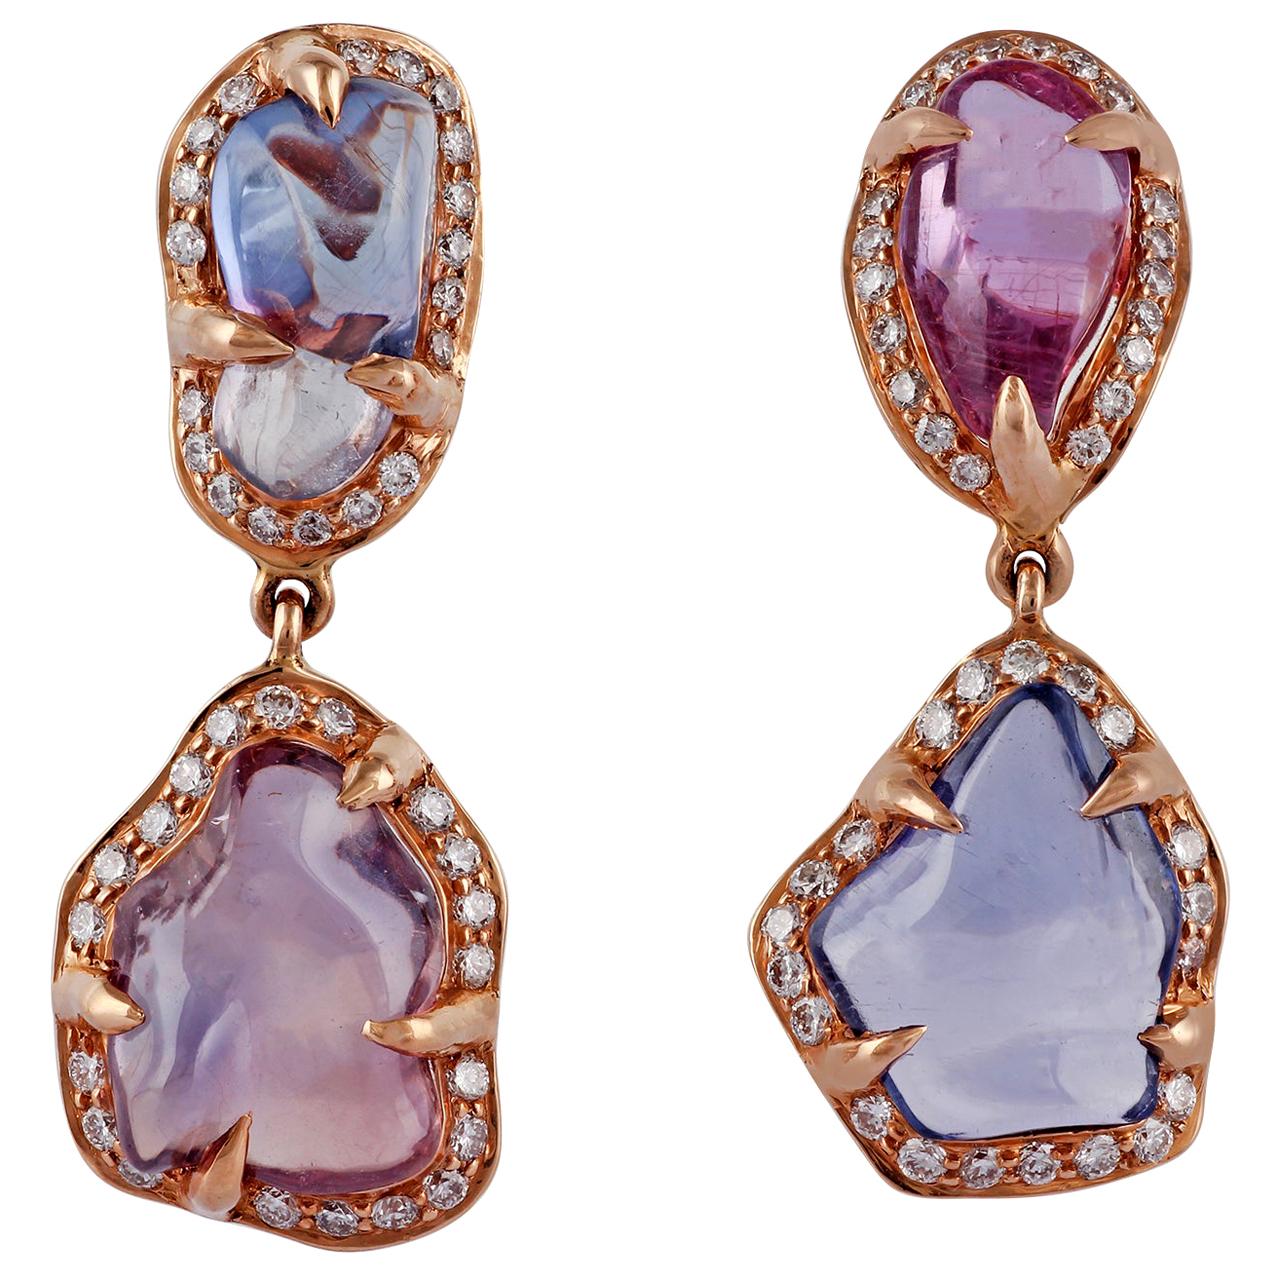 Tumbled Shaped Multi Sapphire and Diamond Earrings Studded in 18 Karat Rose Gold